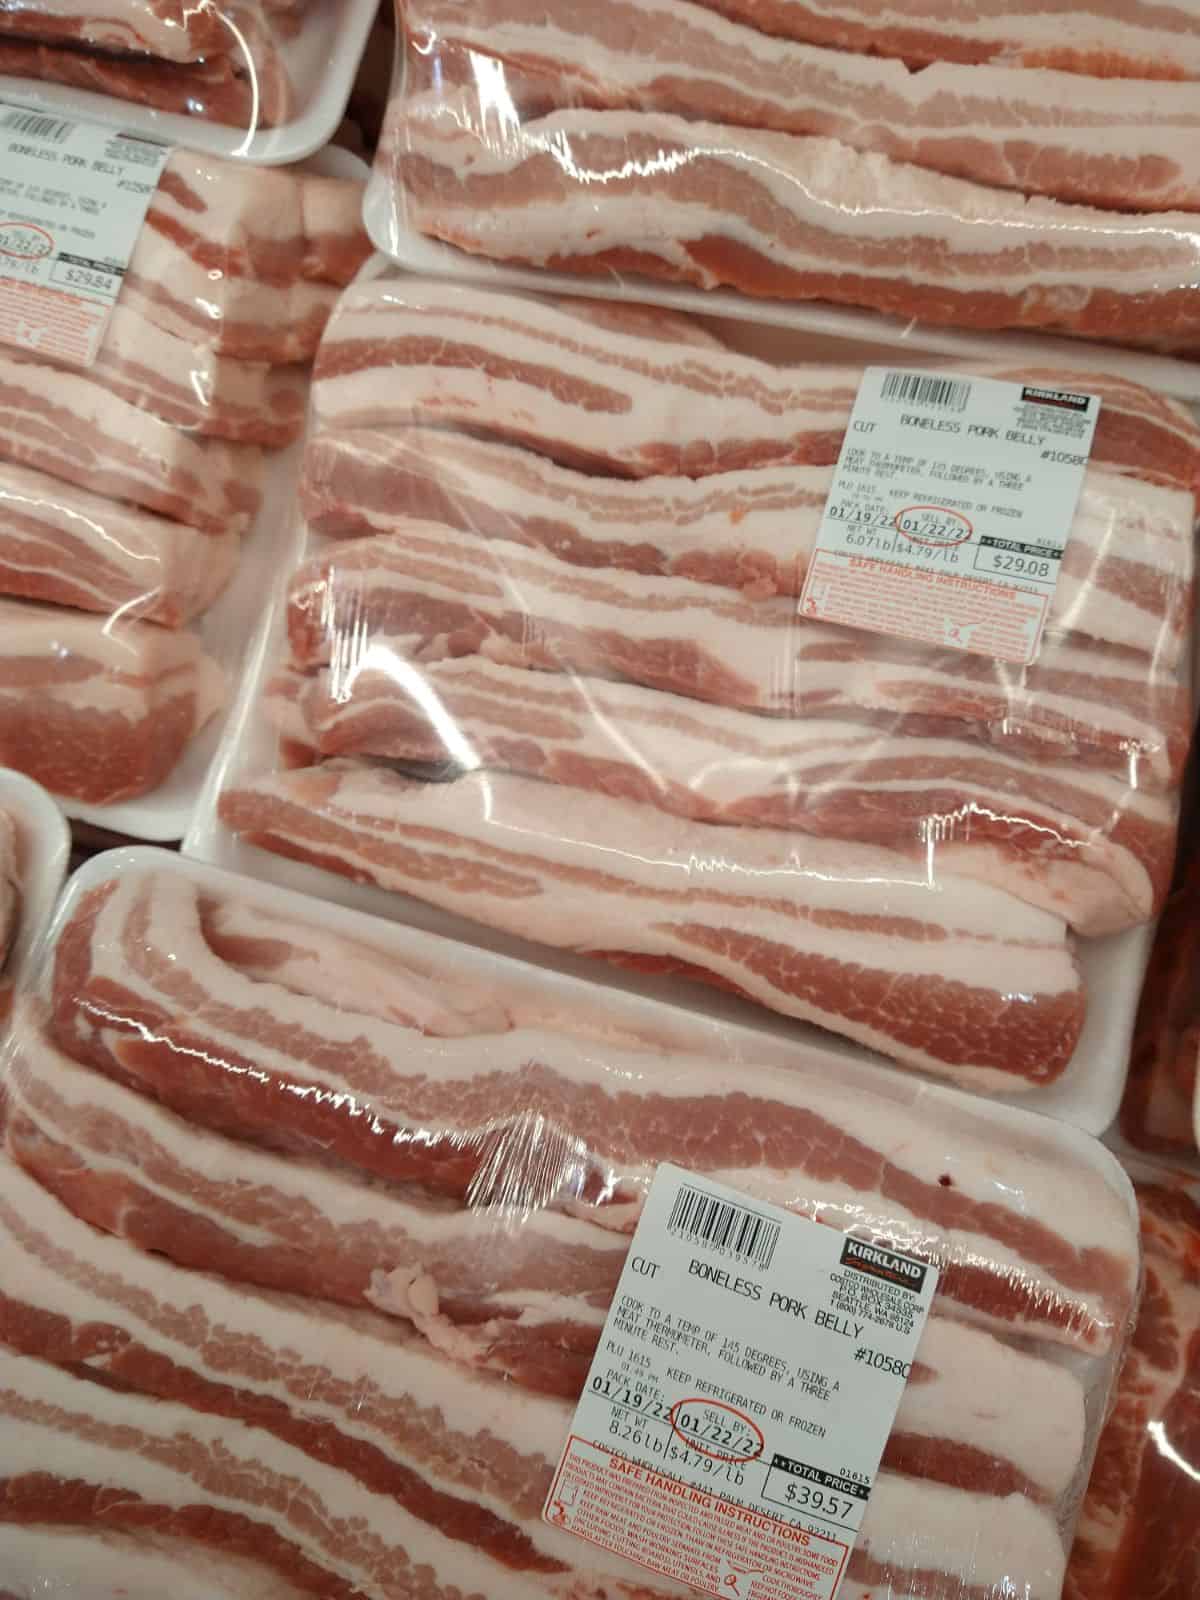 Kirkland packaged boneless pork belly on display at Costco. the sticker says the cost is $4.79/lb.